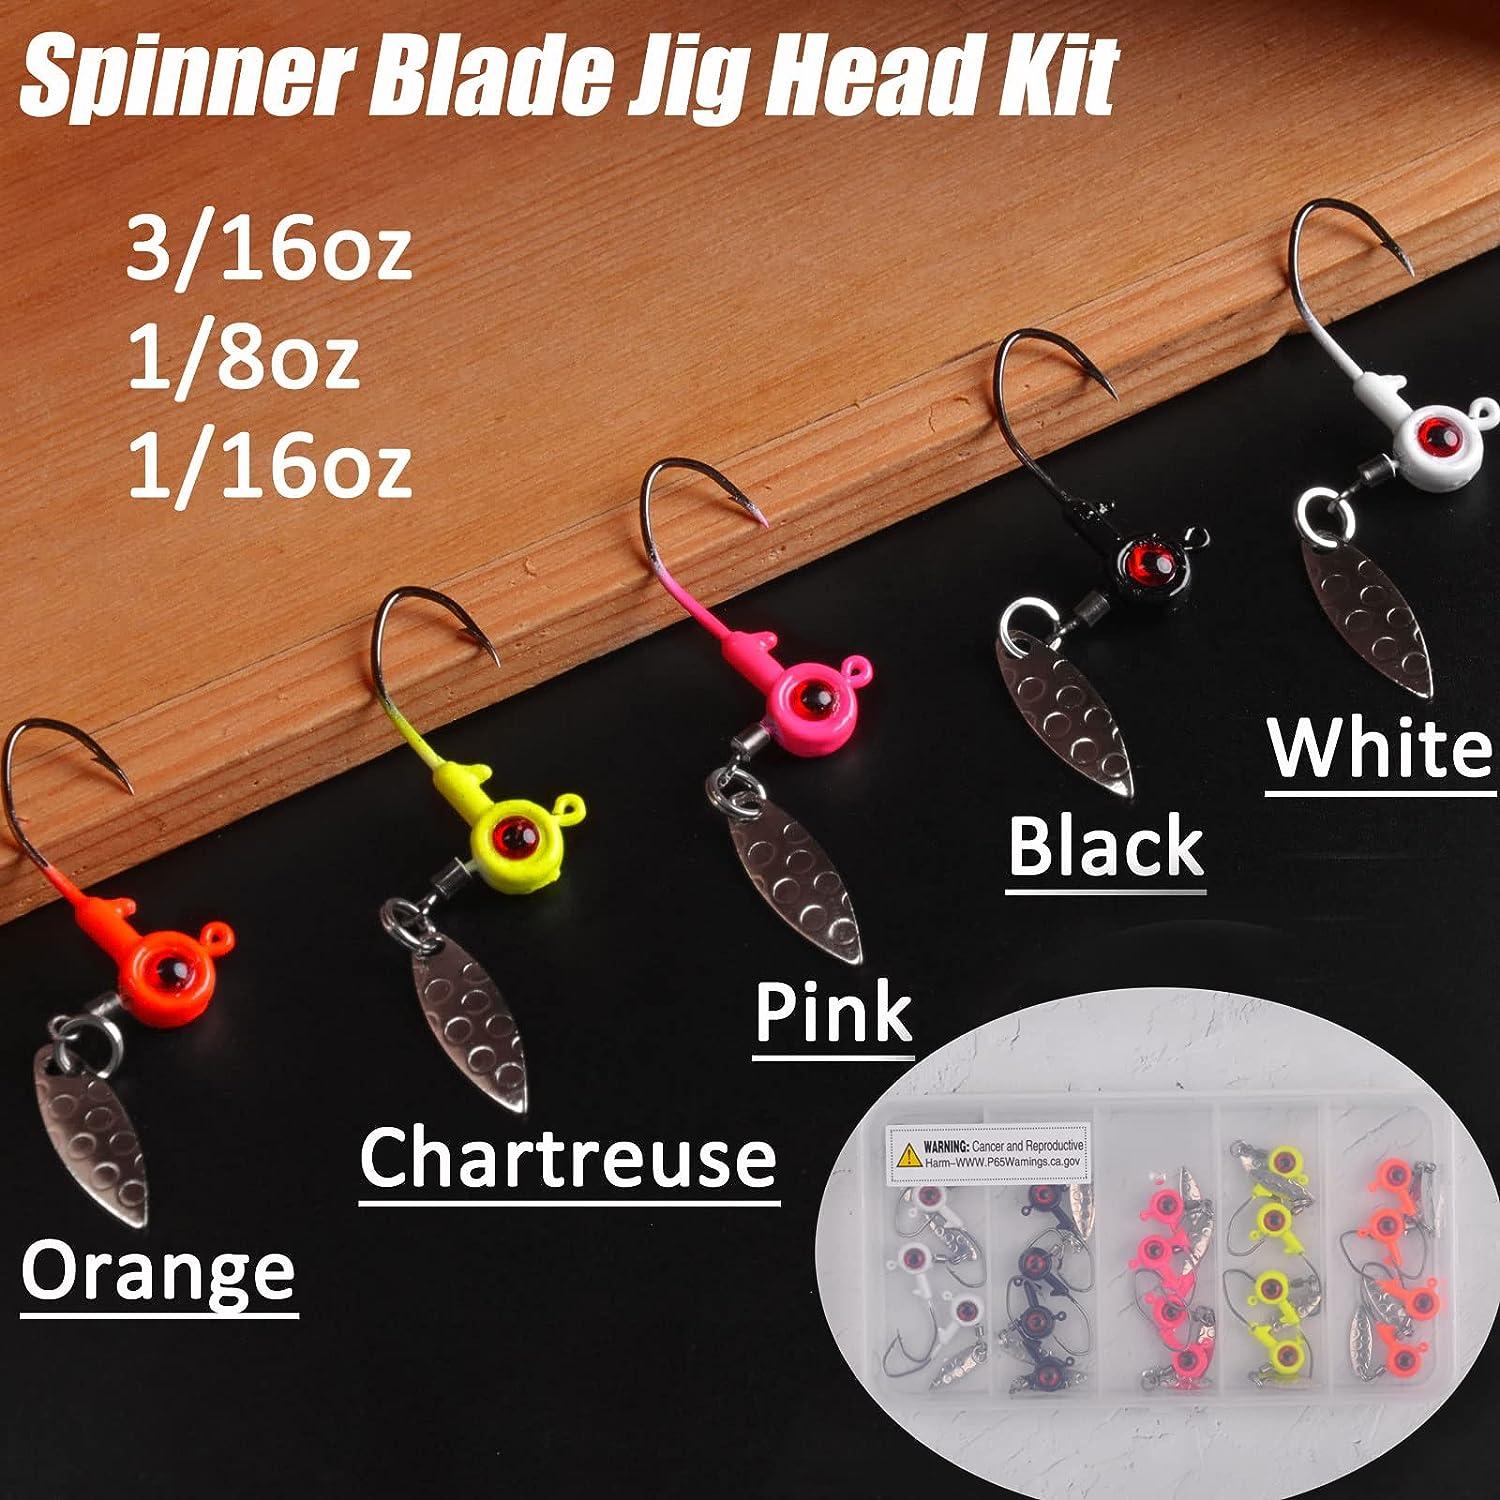 Fishing Jig Heads Kit 20pcs Flat Round Ball Head 3D Eyes Crappie Jig Head  with Spinner Blade Spin Jig Head Hooks for Bass Trout Walleye 1/8oz-20pcs